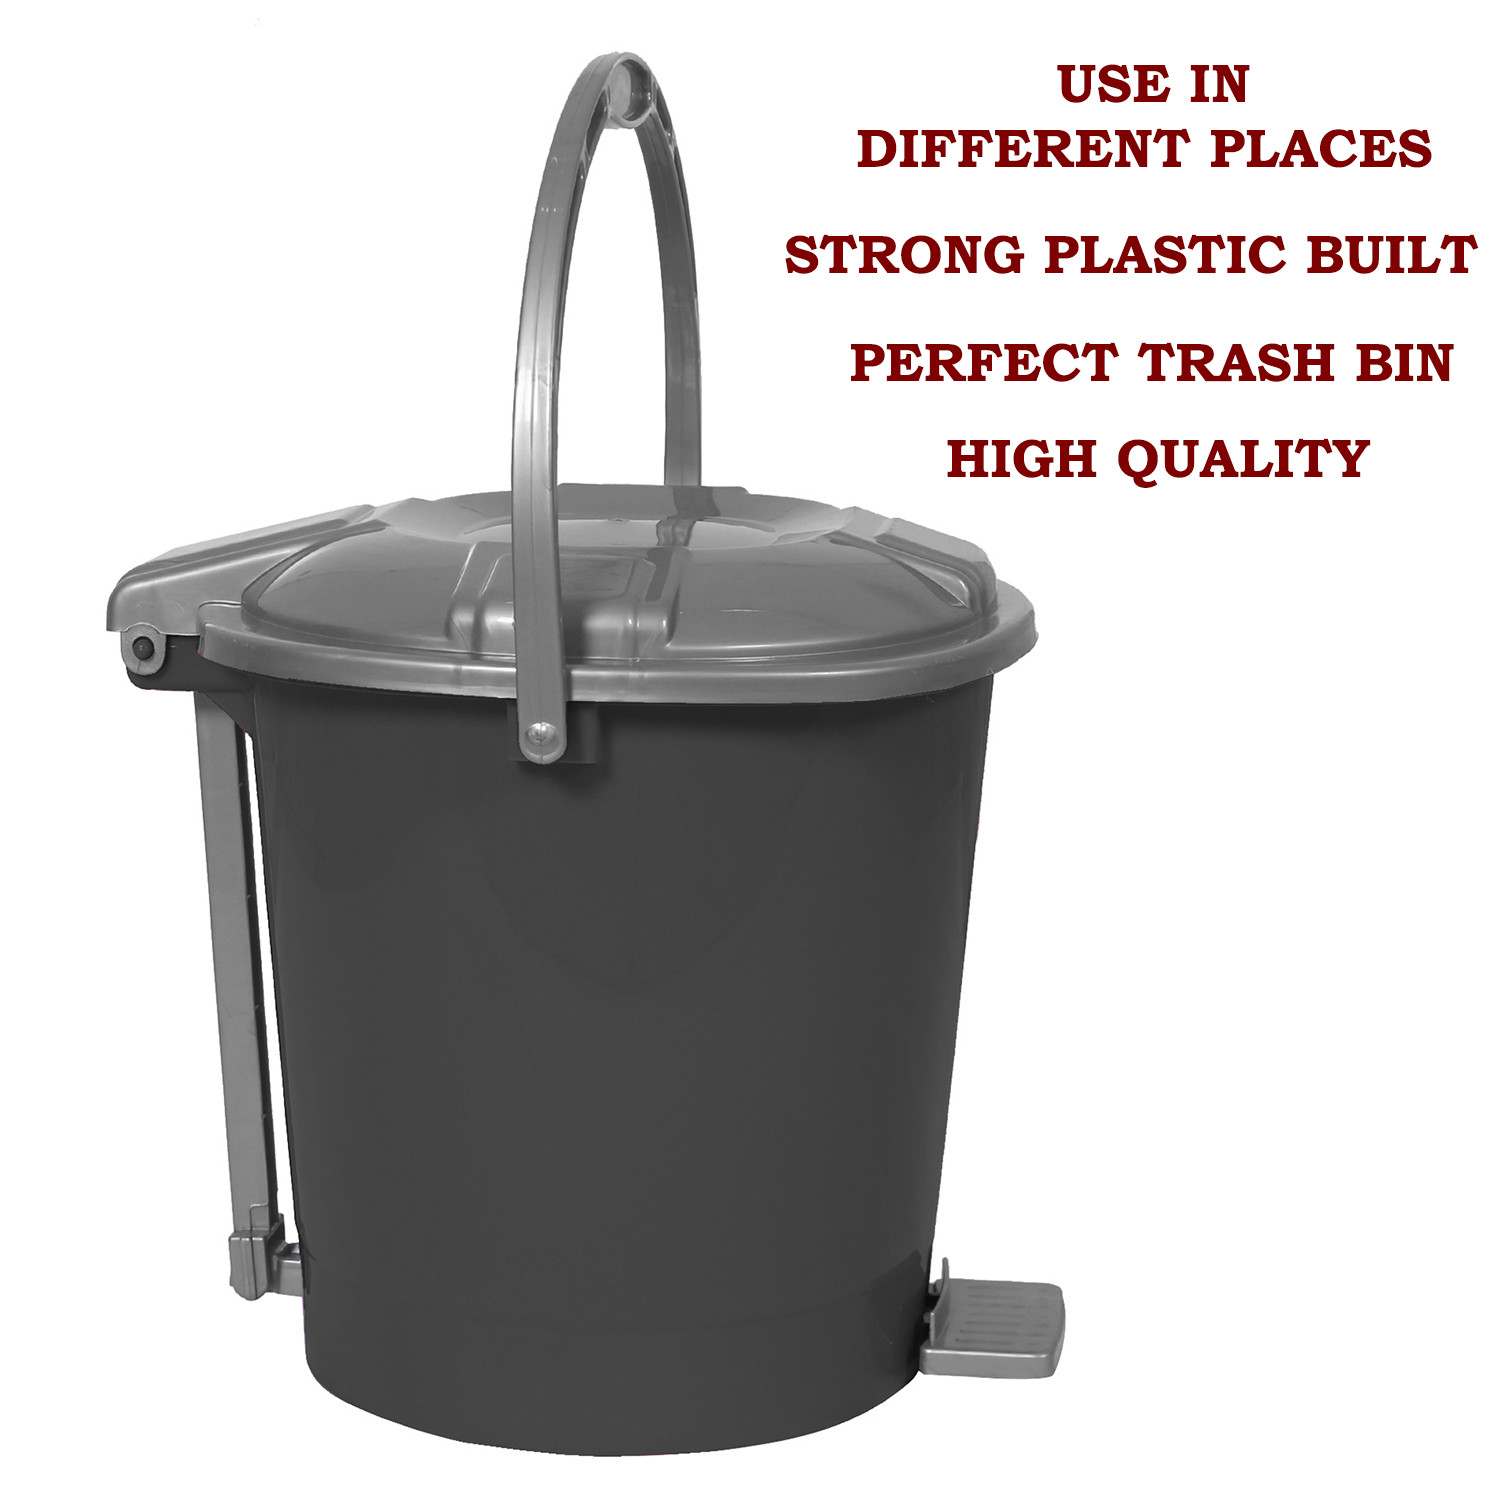 Kuber Industries Durable Plastic Pedal Dustbin|Waste Bin|Trash Can For Kitchen & Home With Handle,7 Litre (Gray)